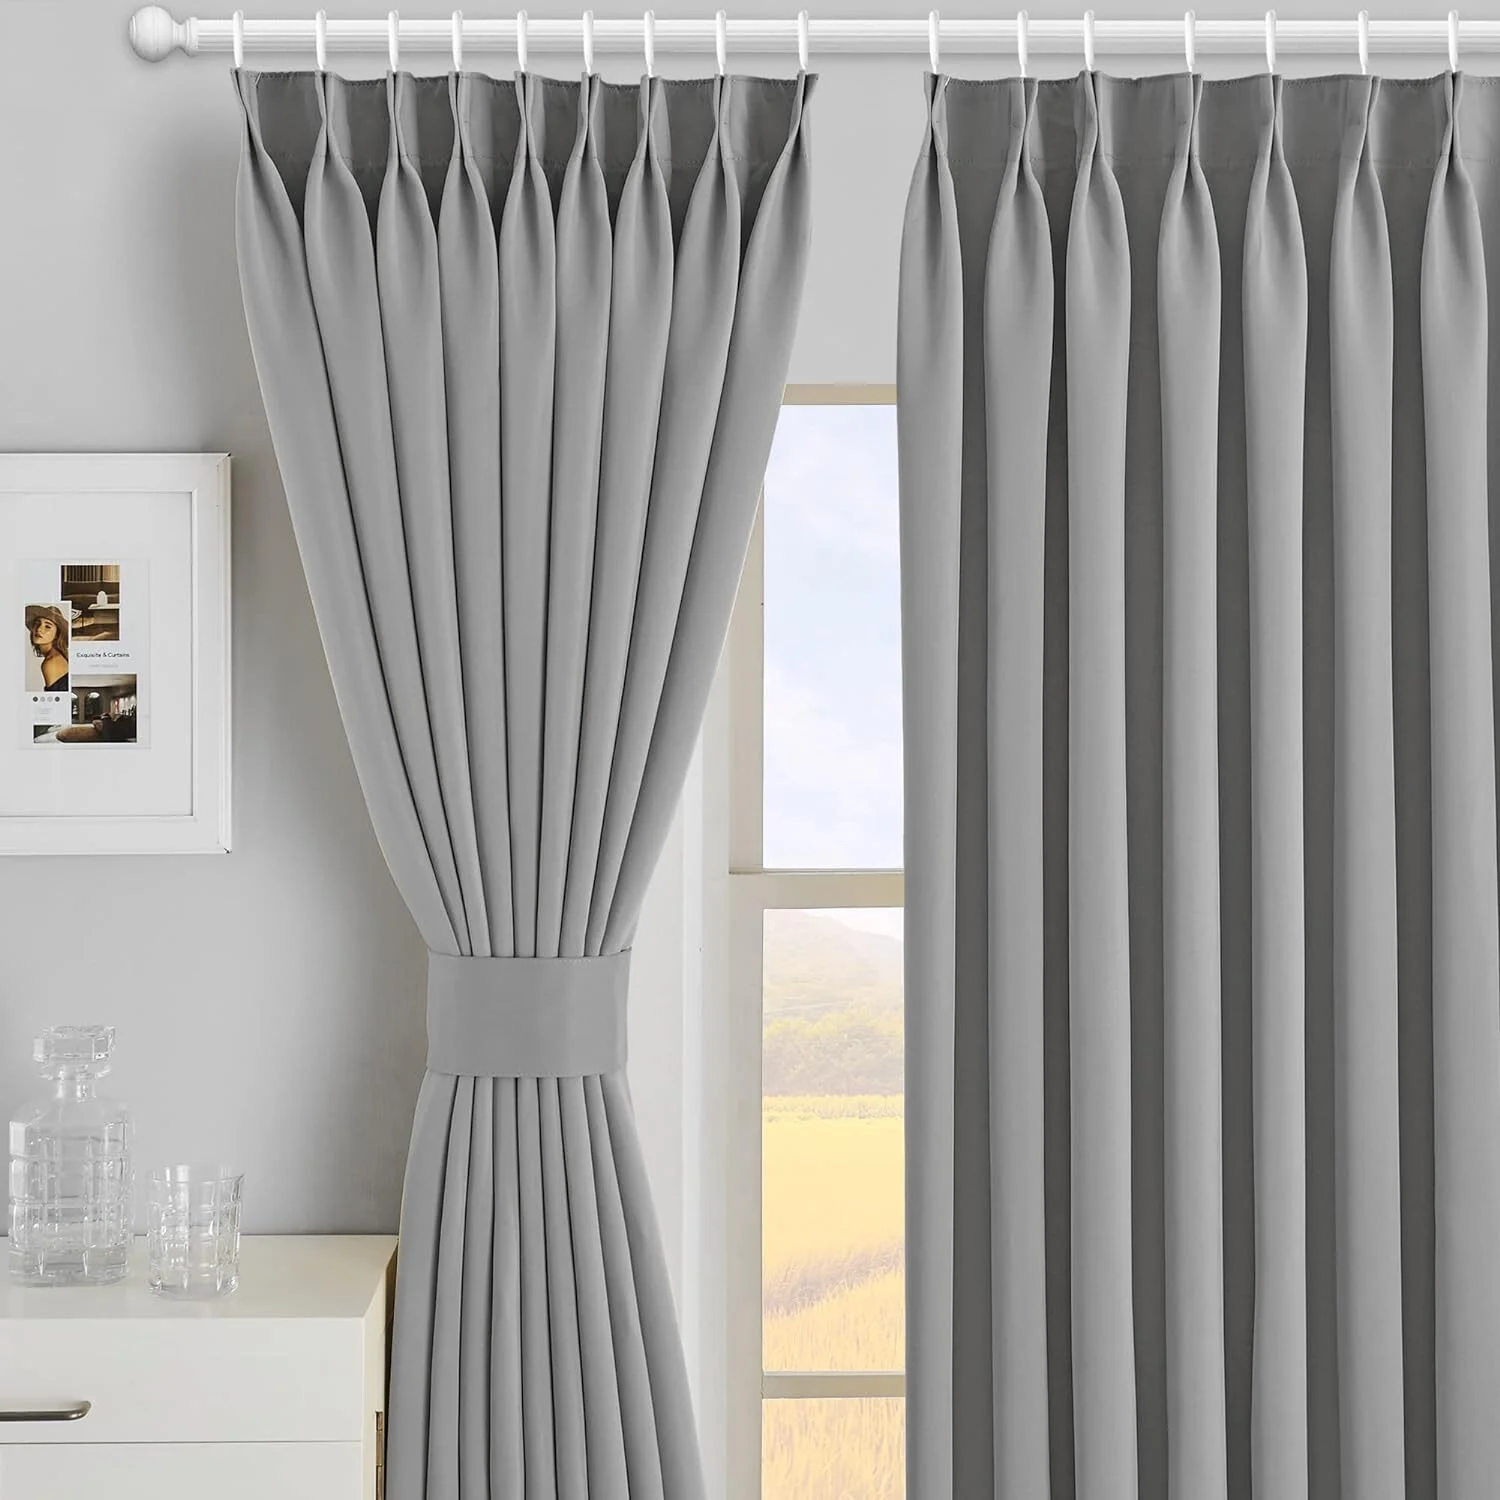 Flowing linen curtains in a neutral beige color